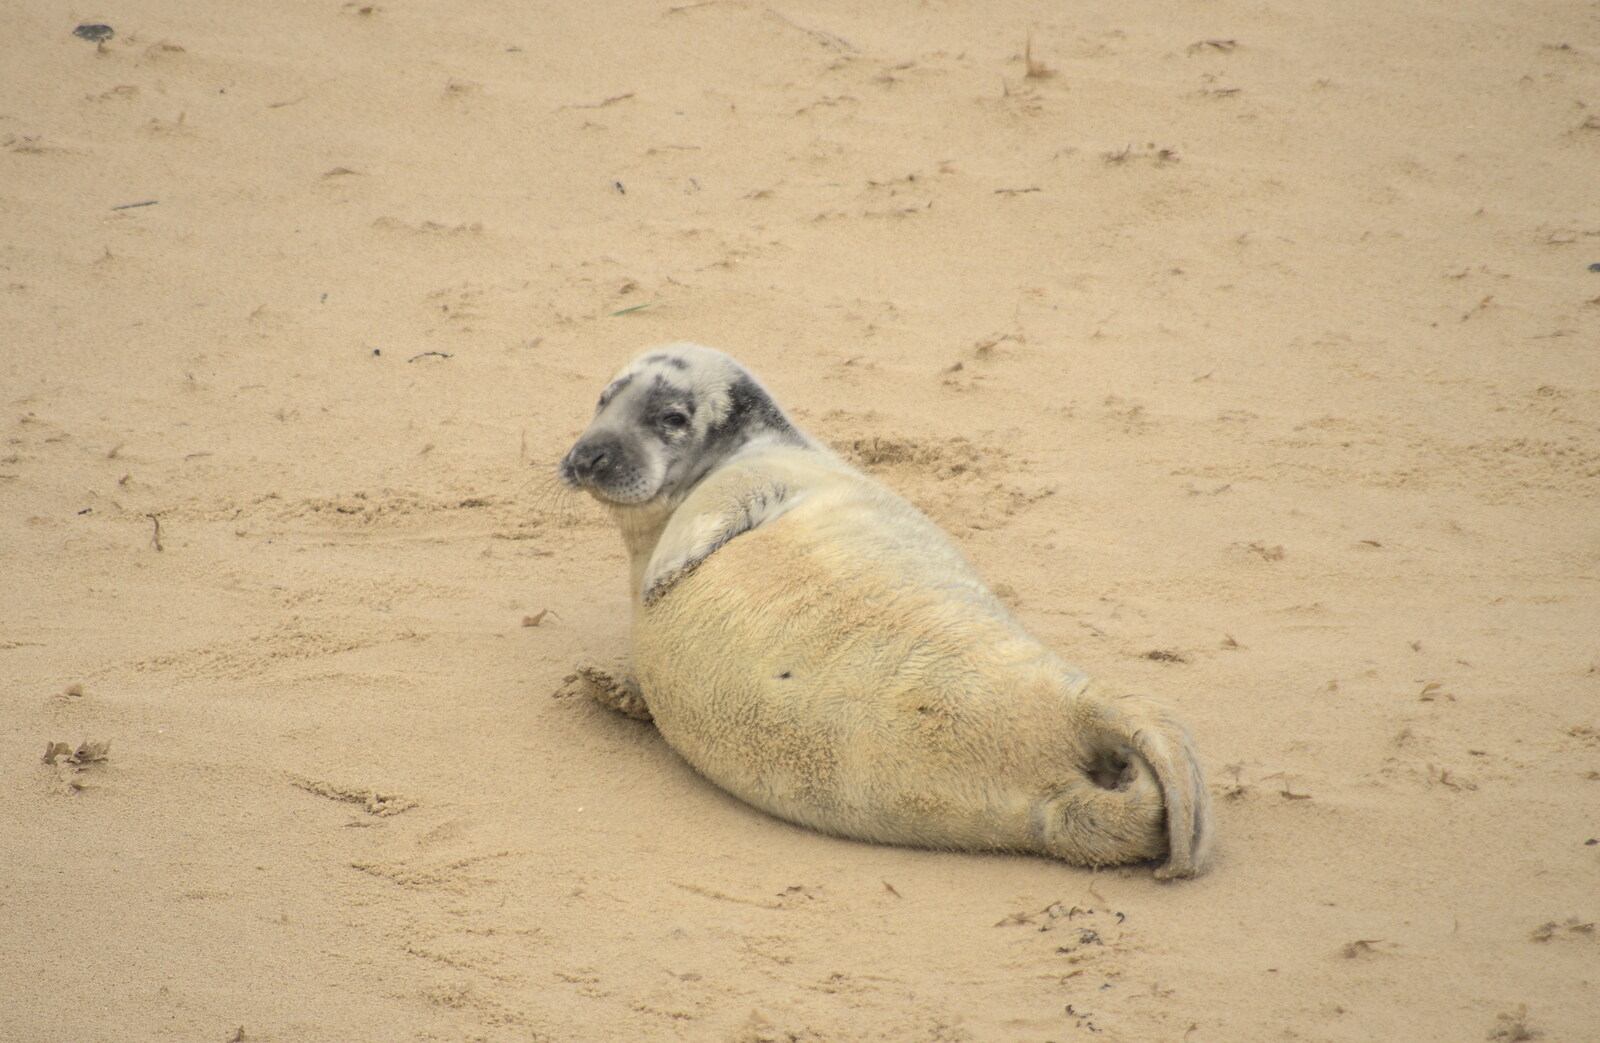 Another seal rolls around from Horsey Seals and Sea Palling, Norfolk Coast - 2nd January 2017